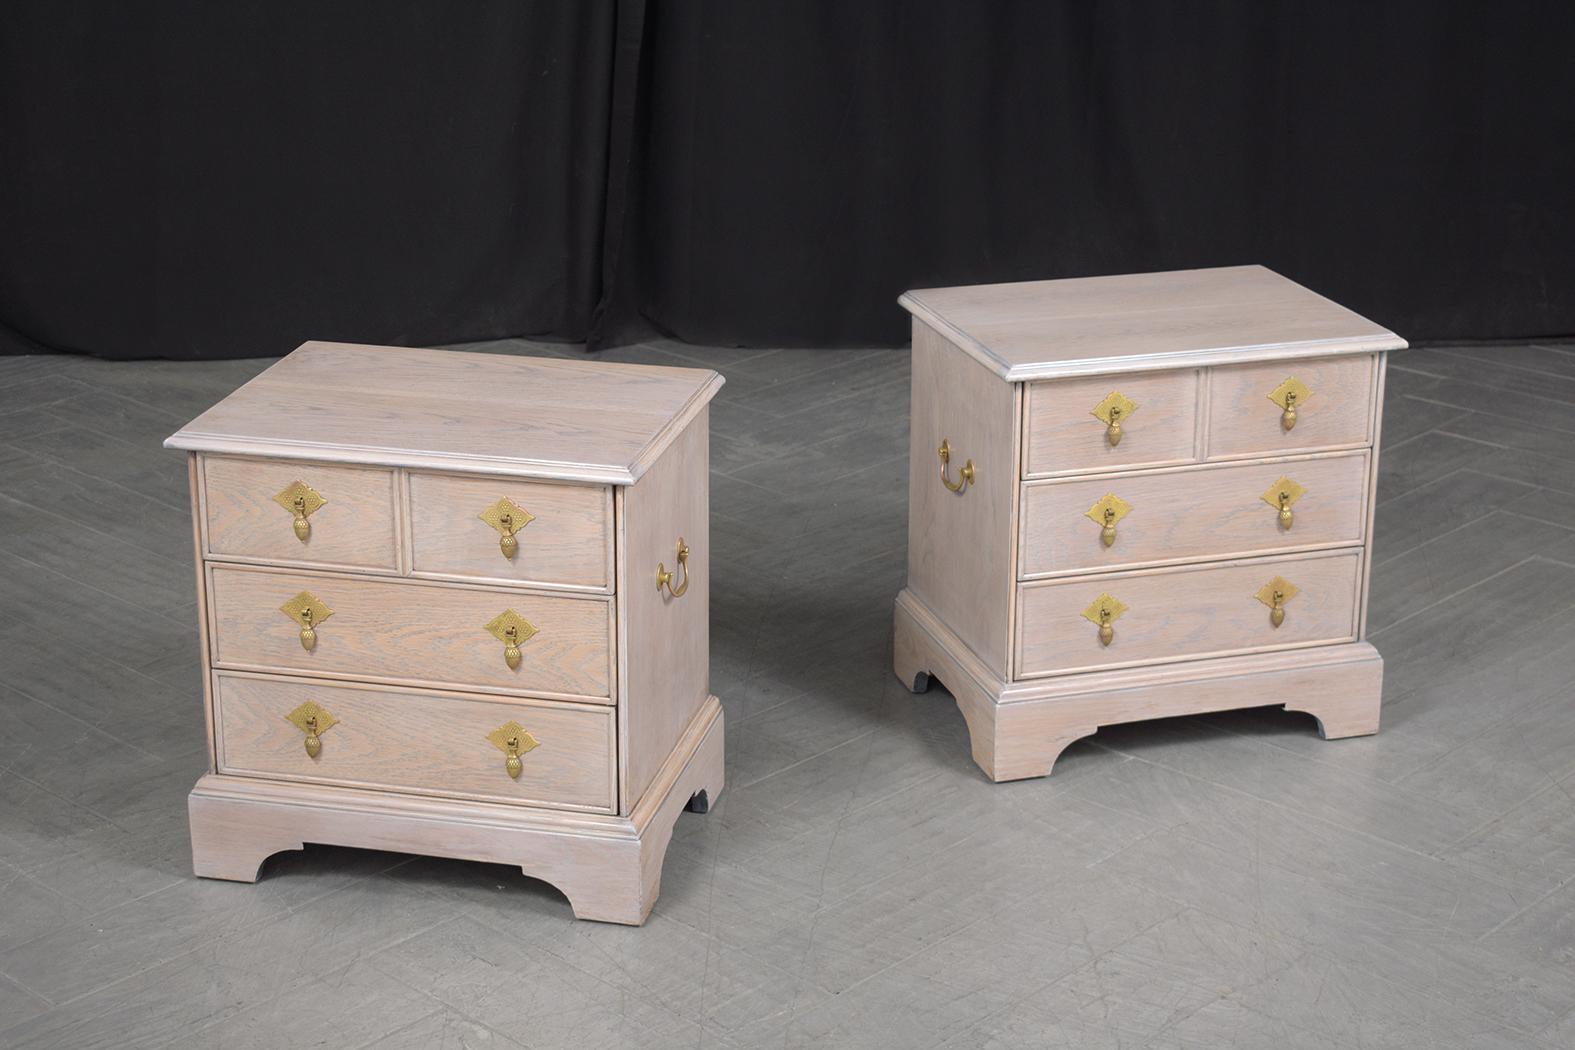 Jacobean Restored 1960s White Oak Bedside Tables with Whitewashed Finish & Brass Handles For Sale